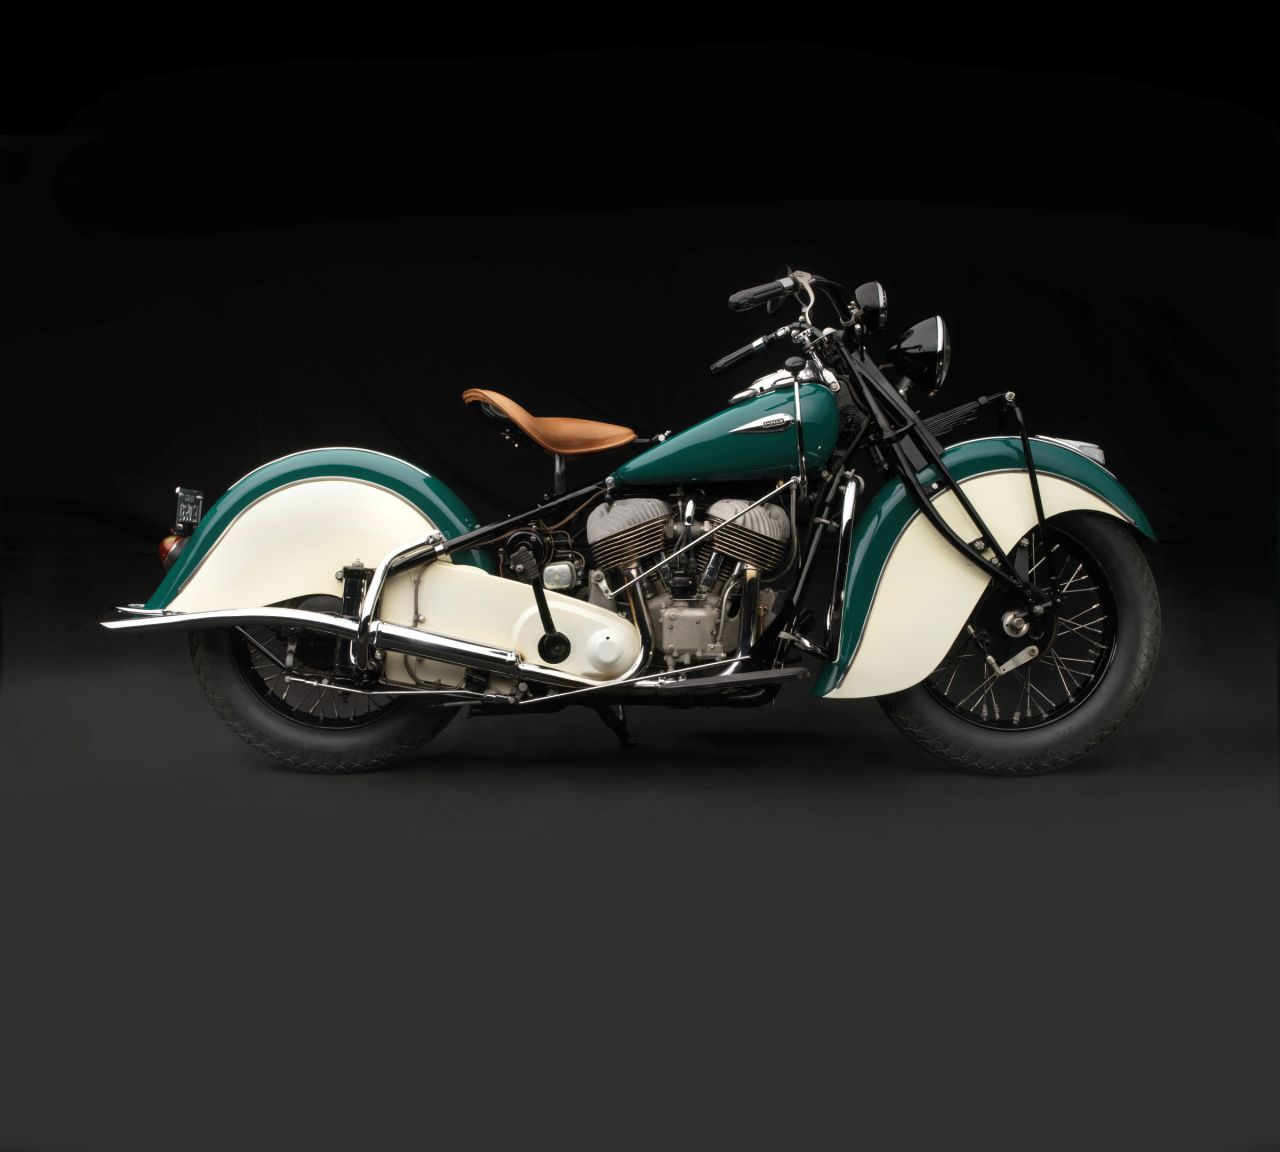 For car and motorcycle construction, the Art Deco movement introduced elegant curves and shiny metal bodies. 